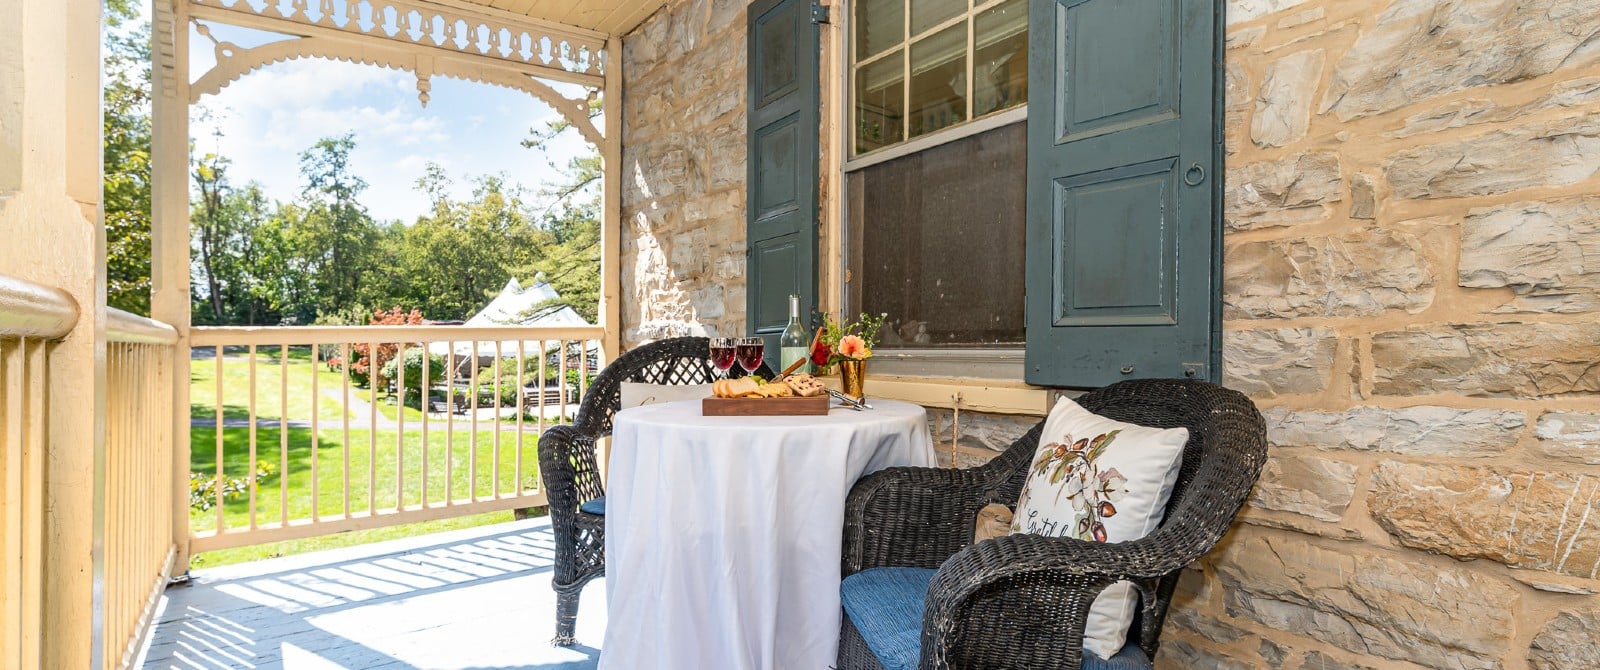 Outdoor deck with two wicker chairs and table with platter of snacks and two glasses of wine